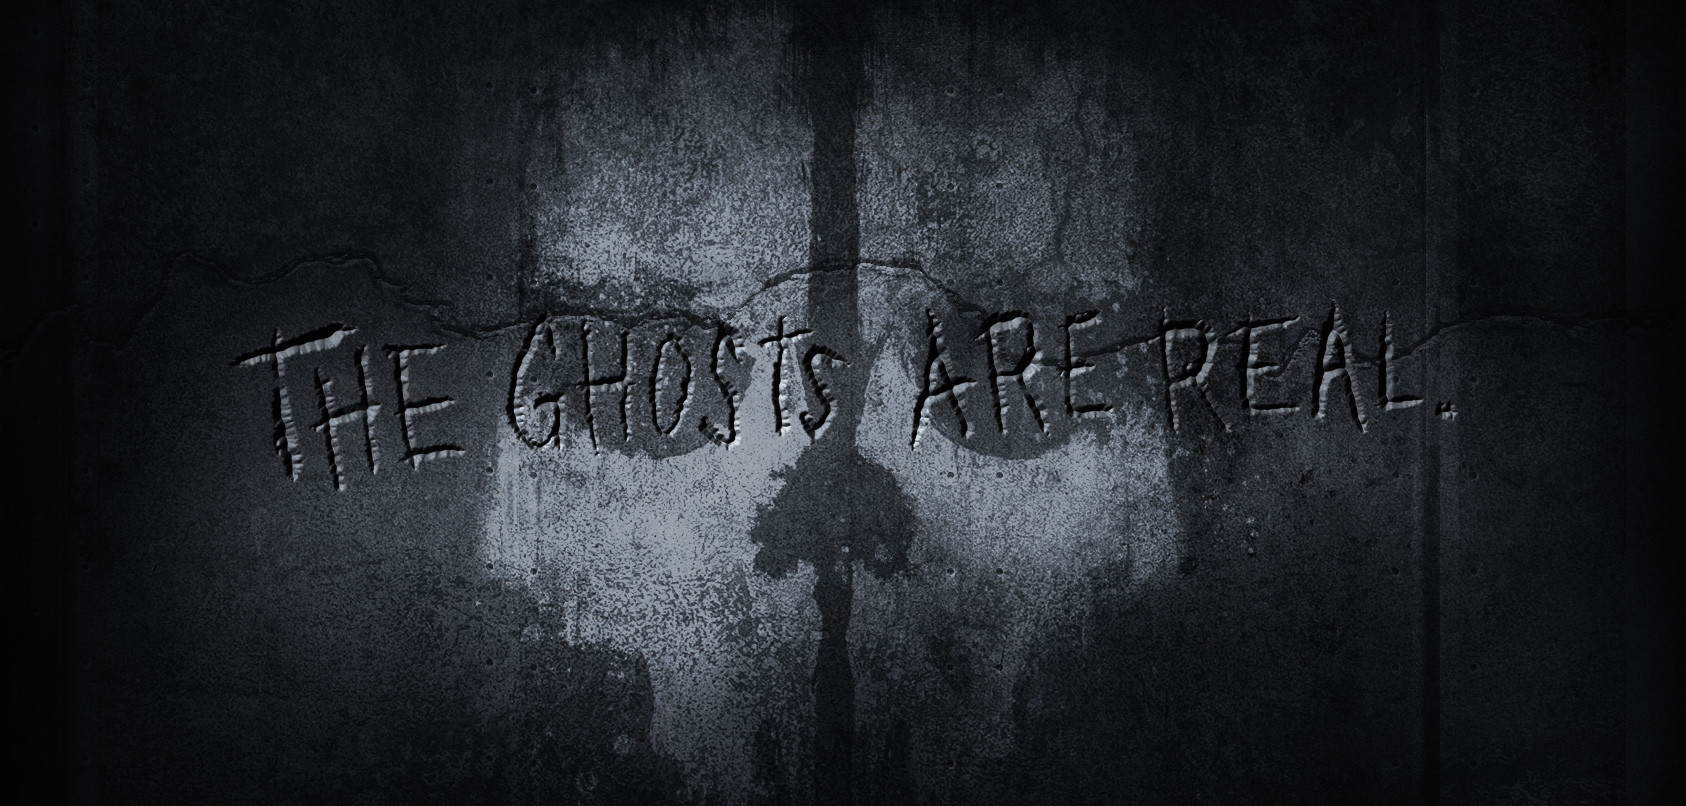  download call of duty ghosts background and make this wallpaper for 1686x806